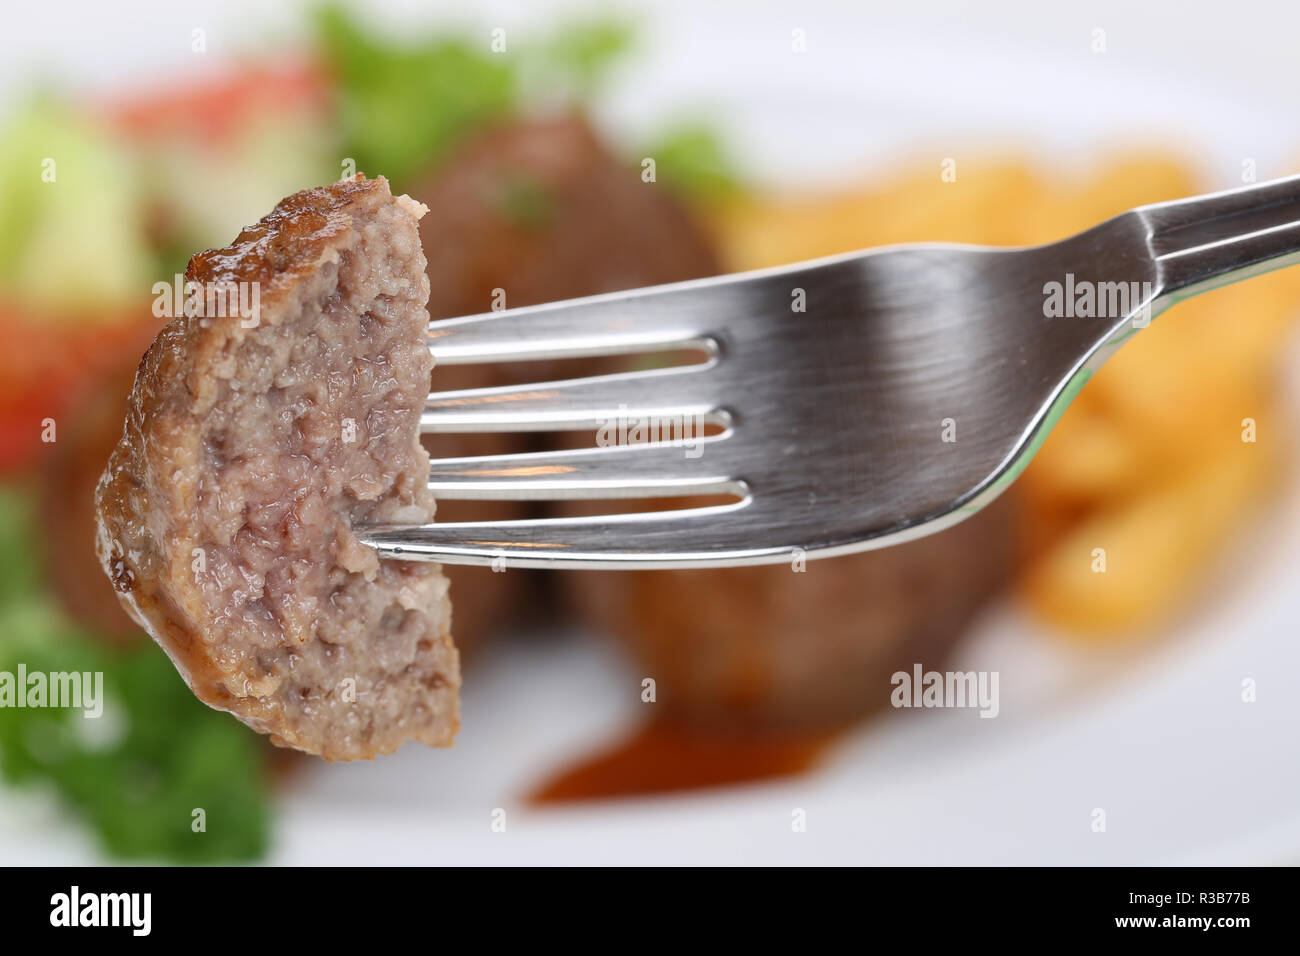 meatball or meatballs eat on a fork Stock Photo